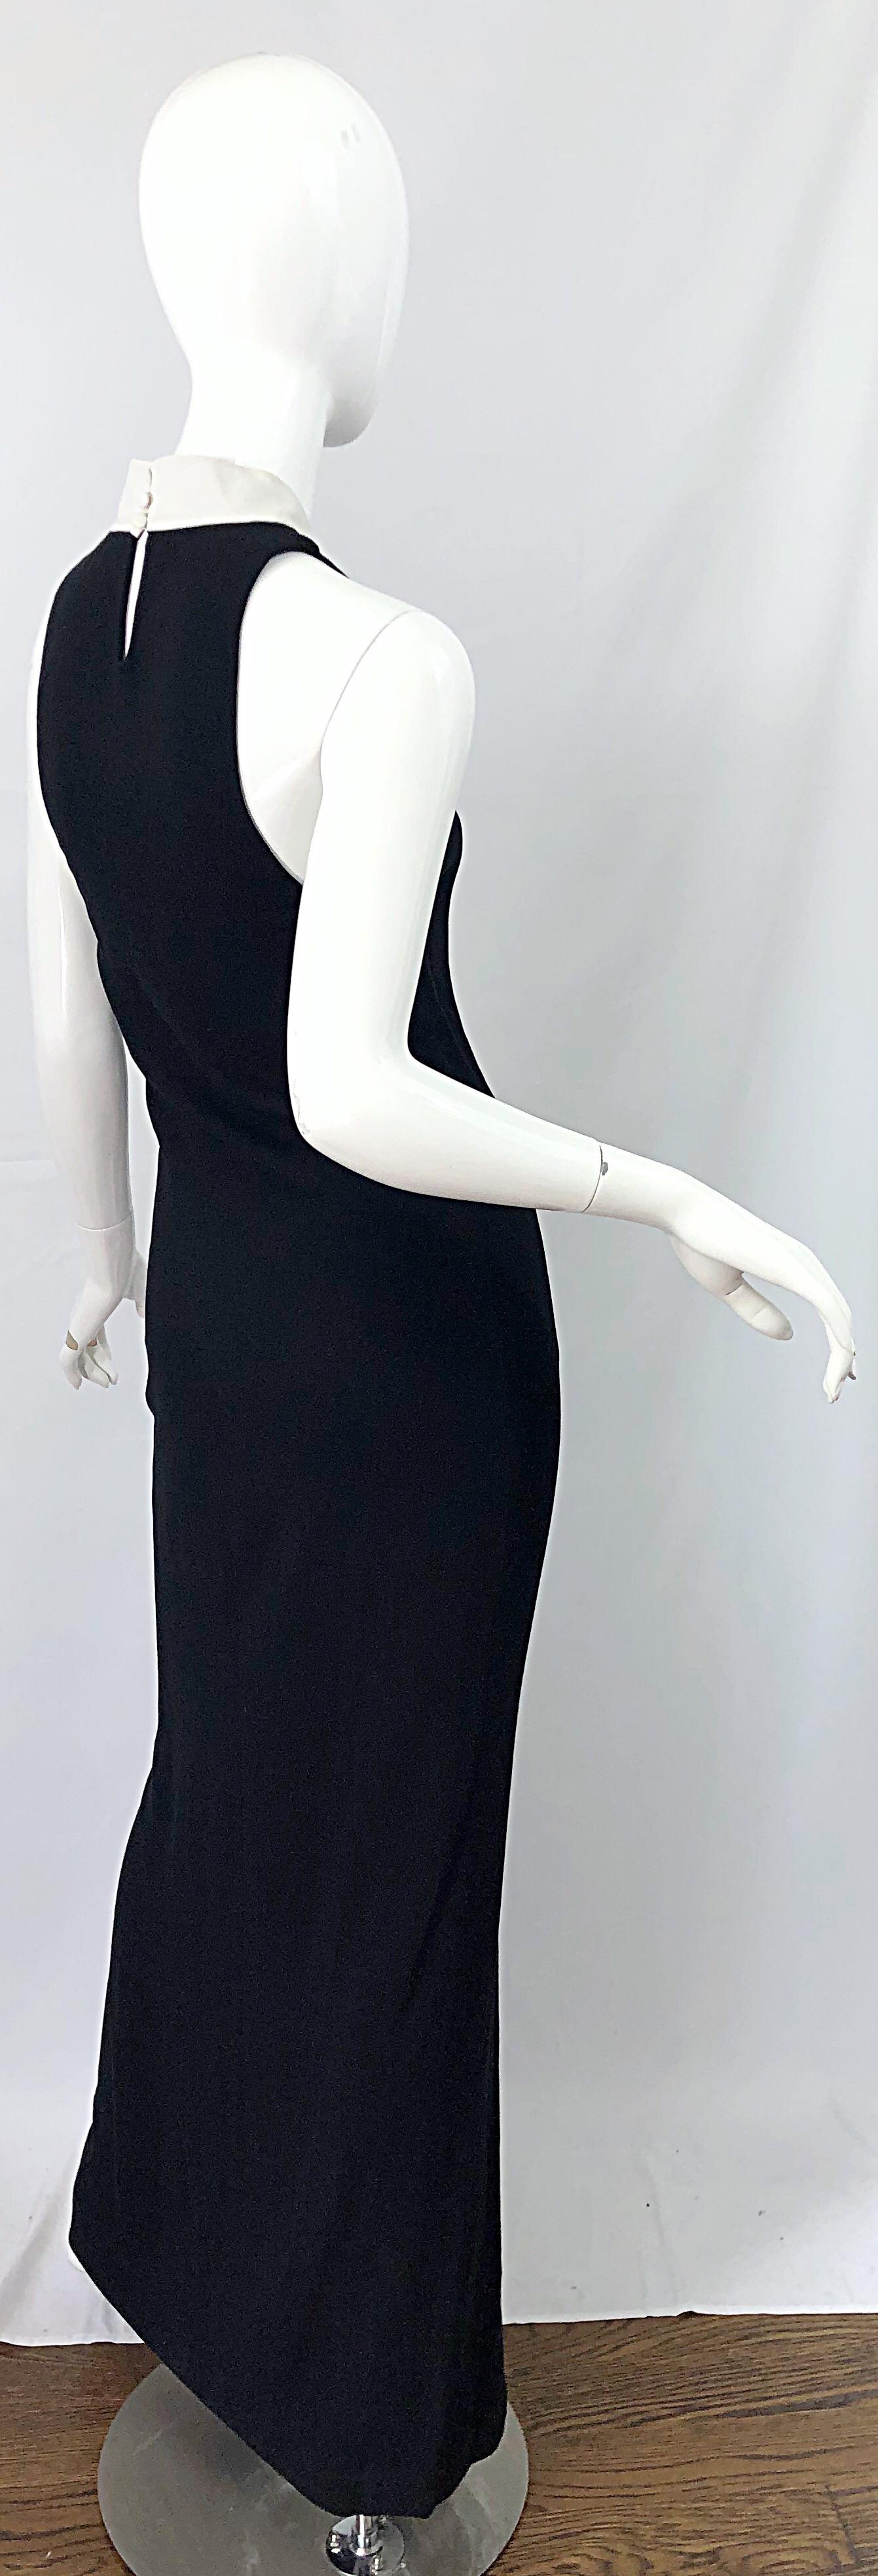 Women's Yves Saint Laurent Tom Ford Black White Plunging Cleavage Cut Out Gown Dress For Sale